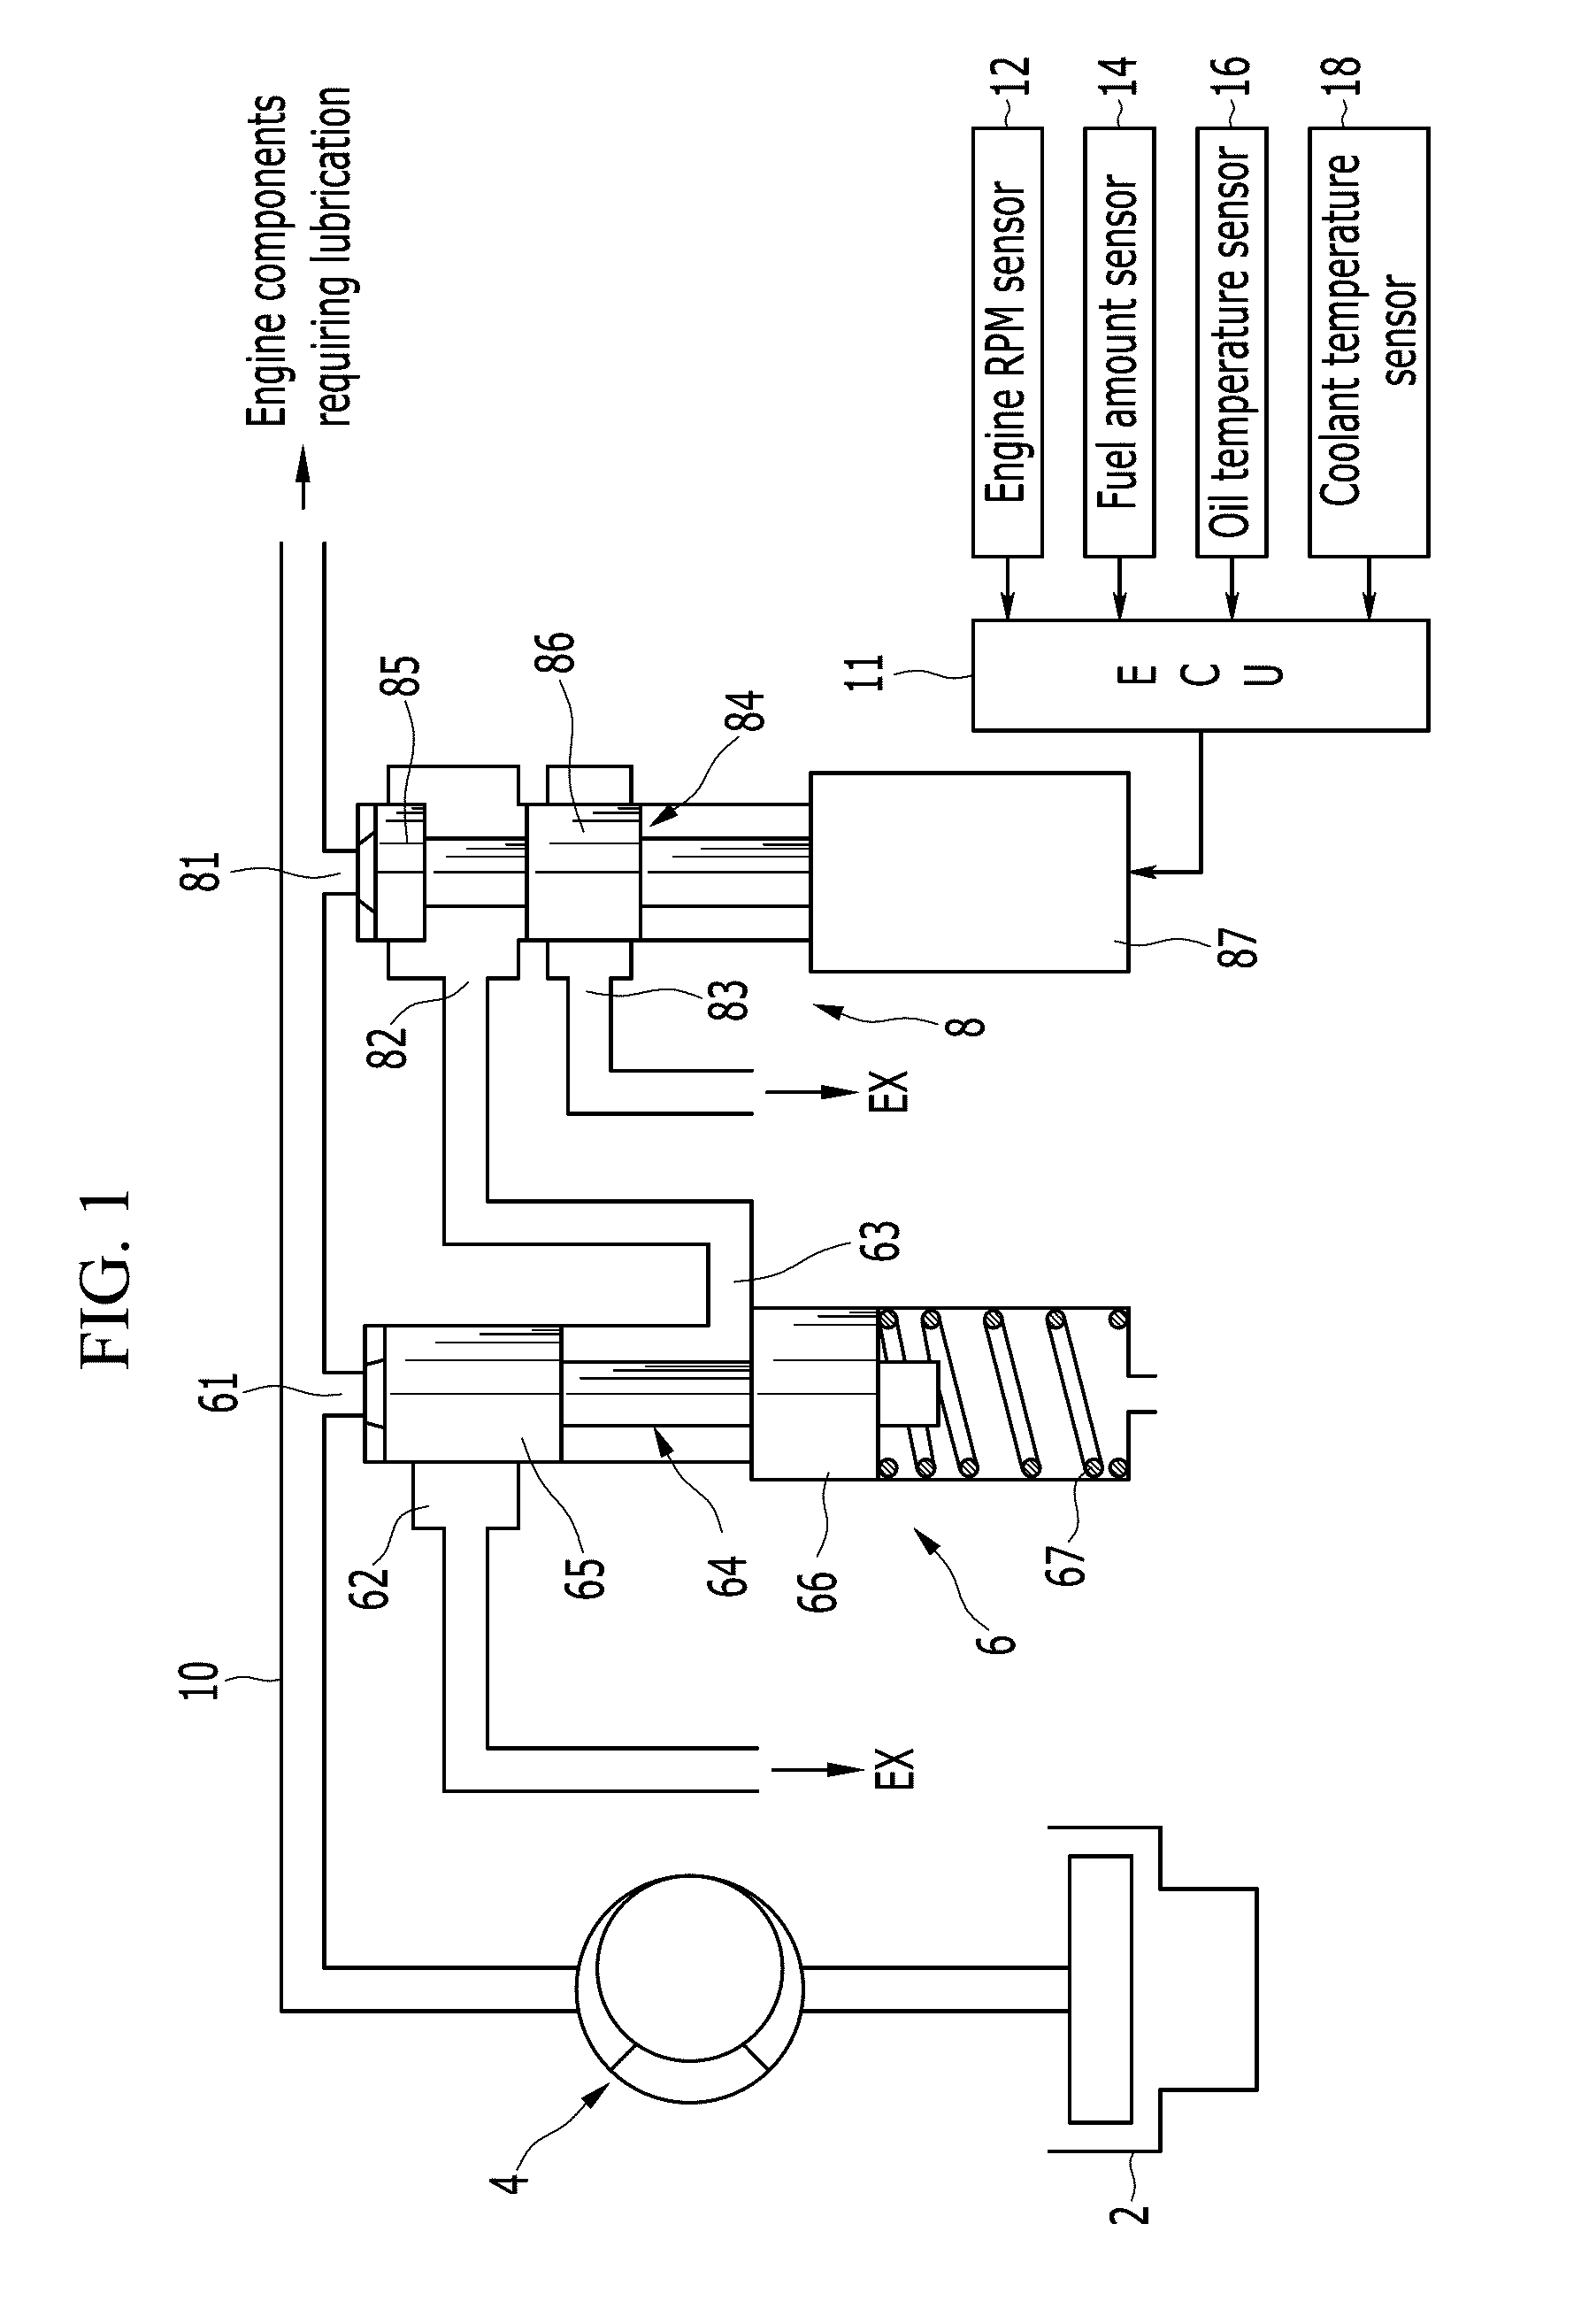 Oil pump system of an engine for a vehicle